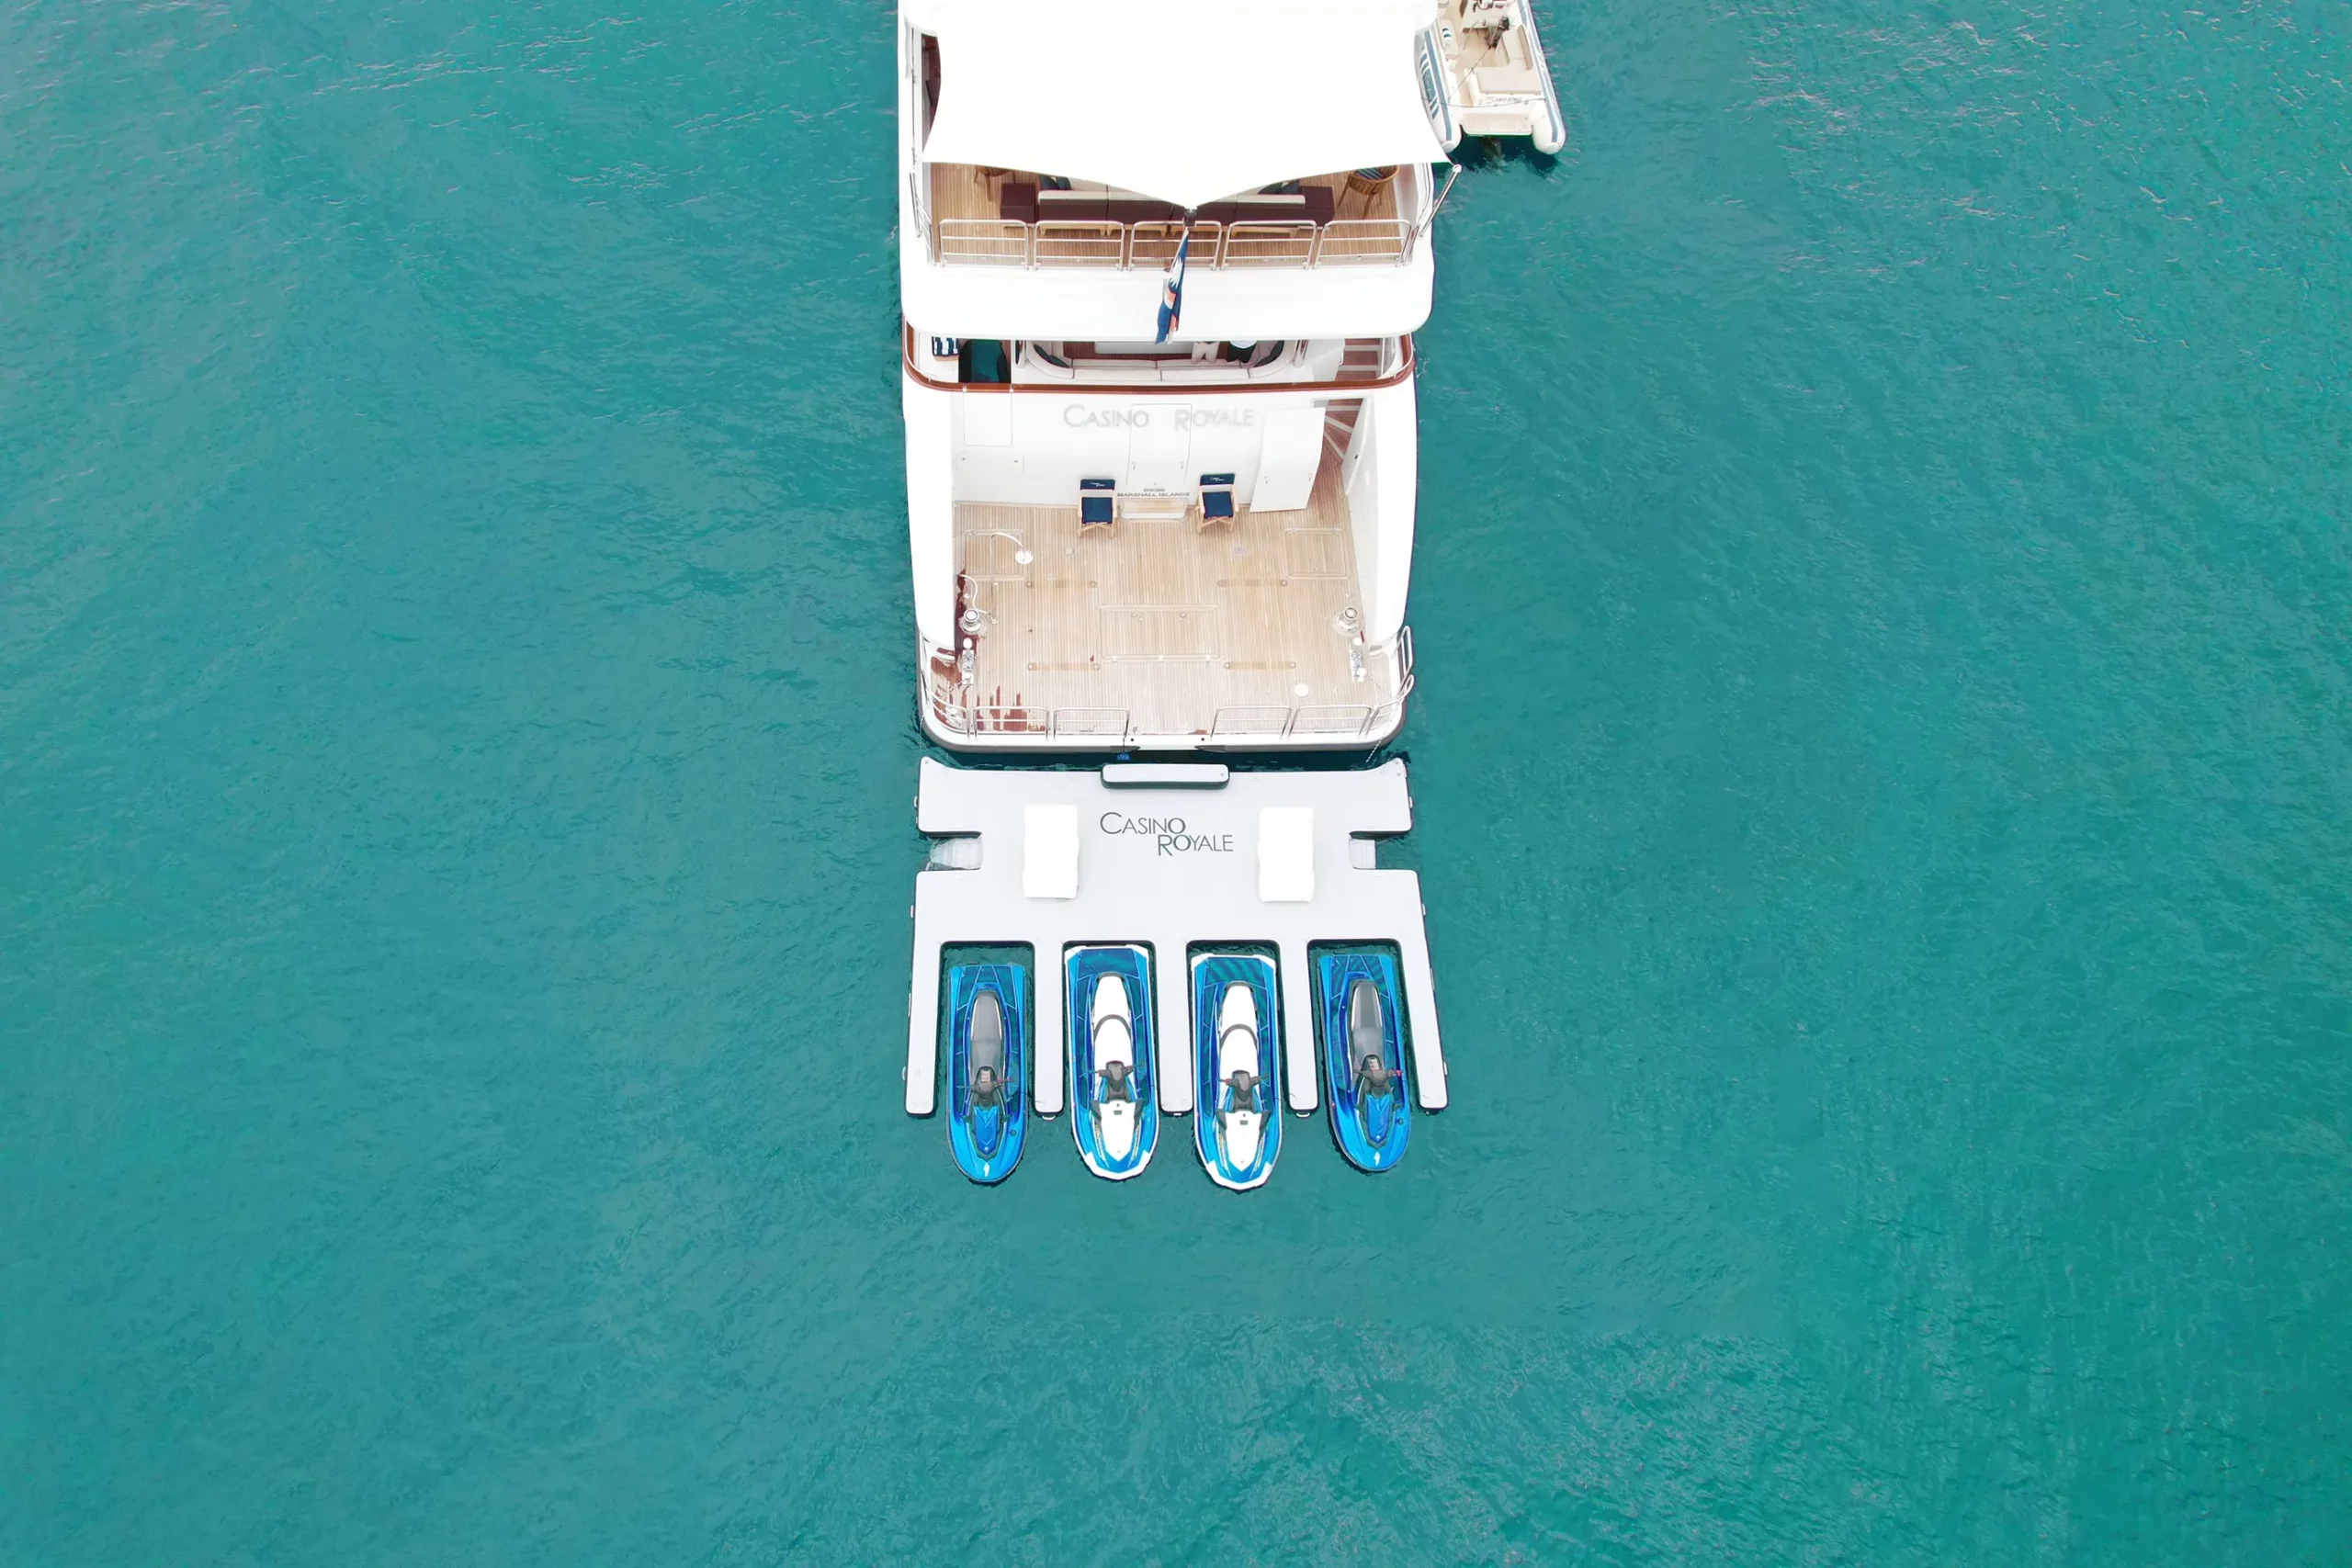 Jet Ski Dock Beach Loungers MY Casino Royale overhead view in azure water